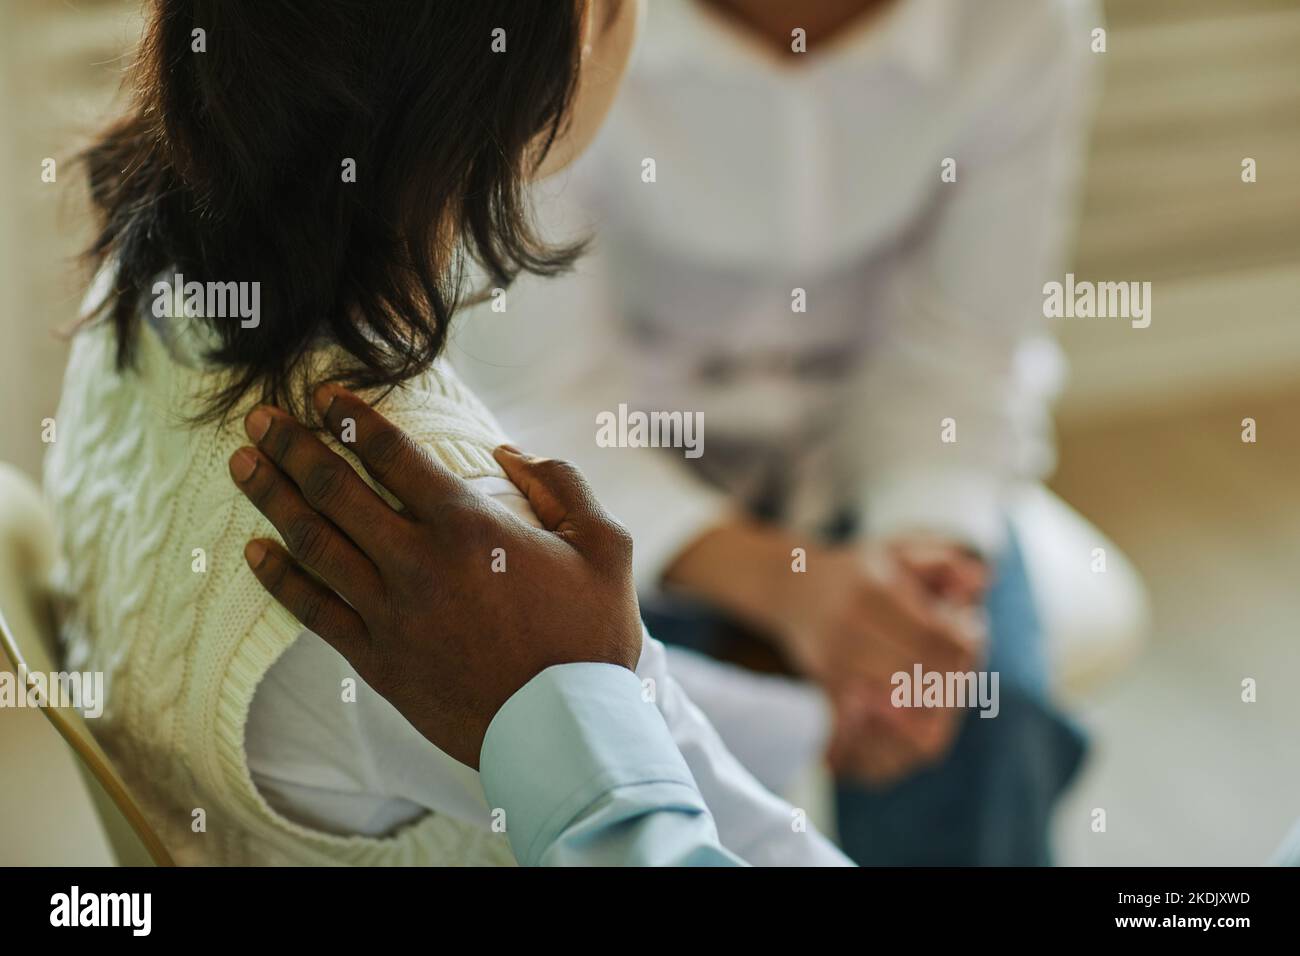 Hand of young African American man on shoulder of schoolgirl with dark long hair supporting her during psychological session Stock Photo